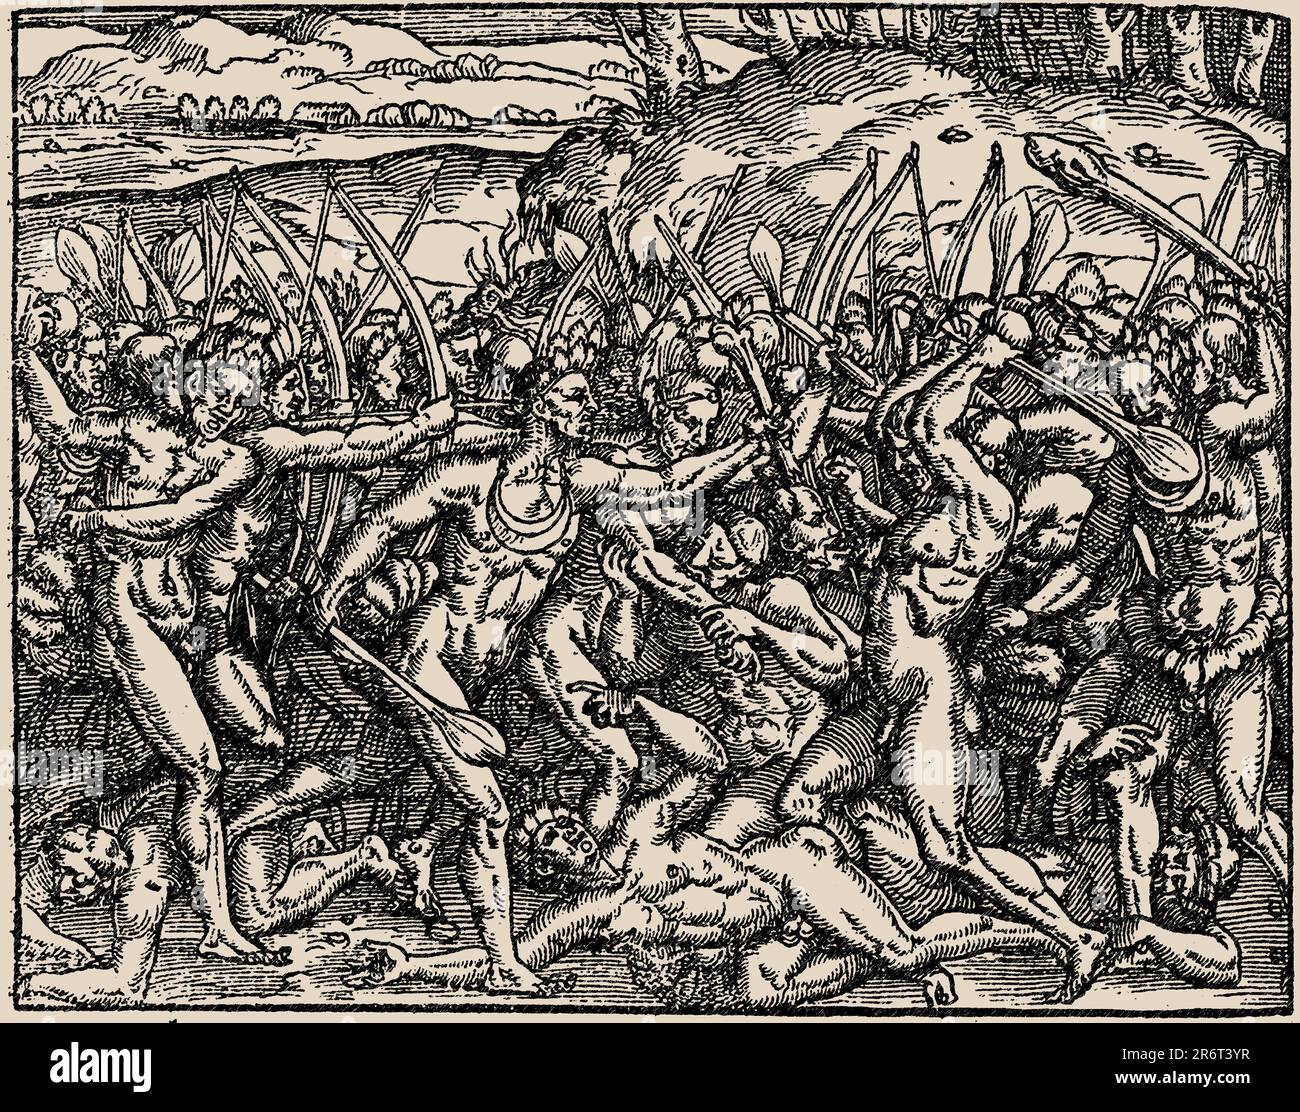 Brazil. As savages make war against each other... From Cosmografia universal by André Thevet. Museum: PRIVATE COLLECTION. Author: THEODOR DE BRY. Stock Photo